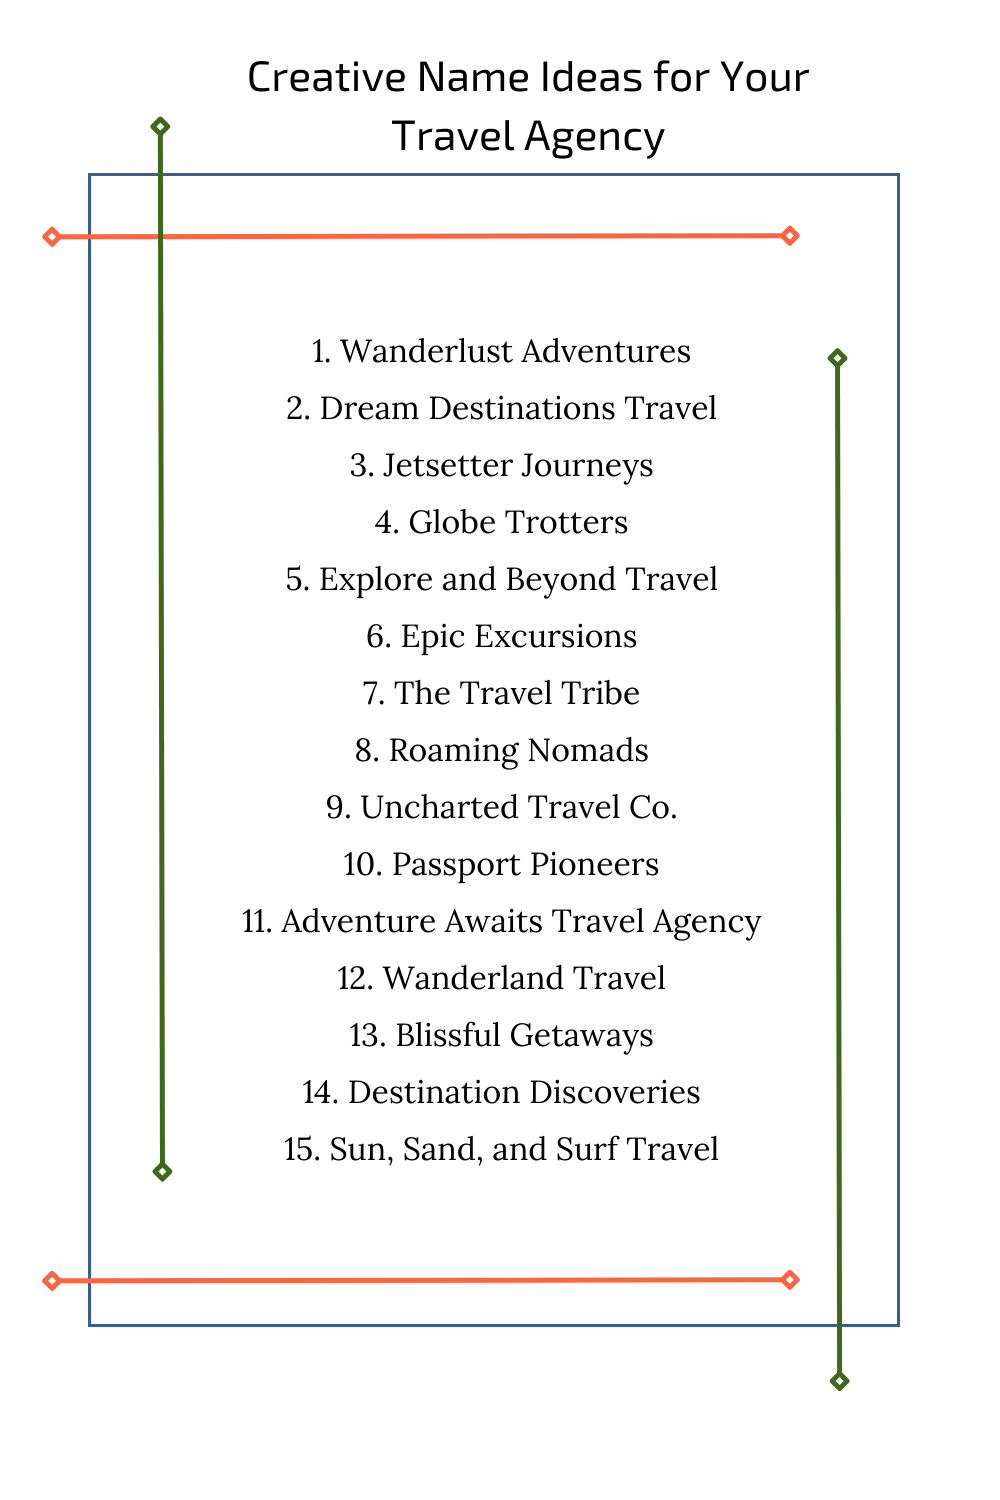 Creative Name Ideas for Your Travel Agency